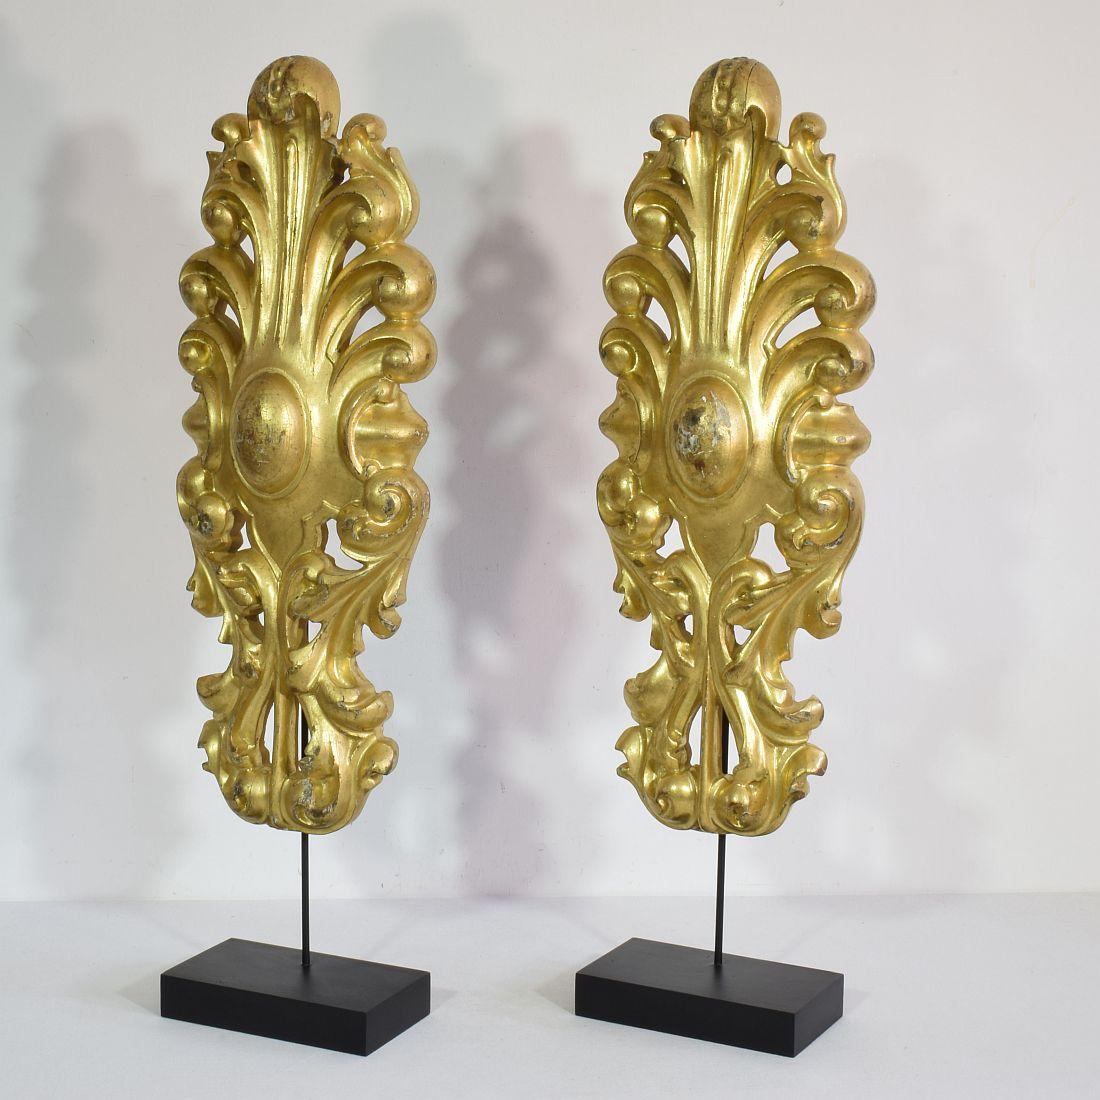 Beautiful pair 18th century neoclassical giltwood ornaments.
Italy circa 1780.
Weathered and small losses
Measurements are individual and include the wooden base.